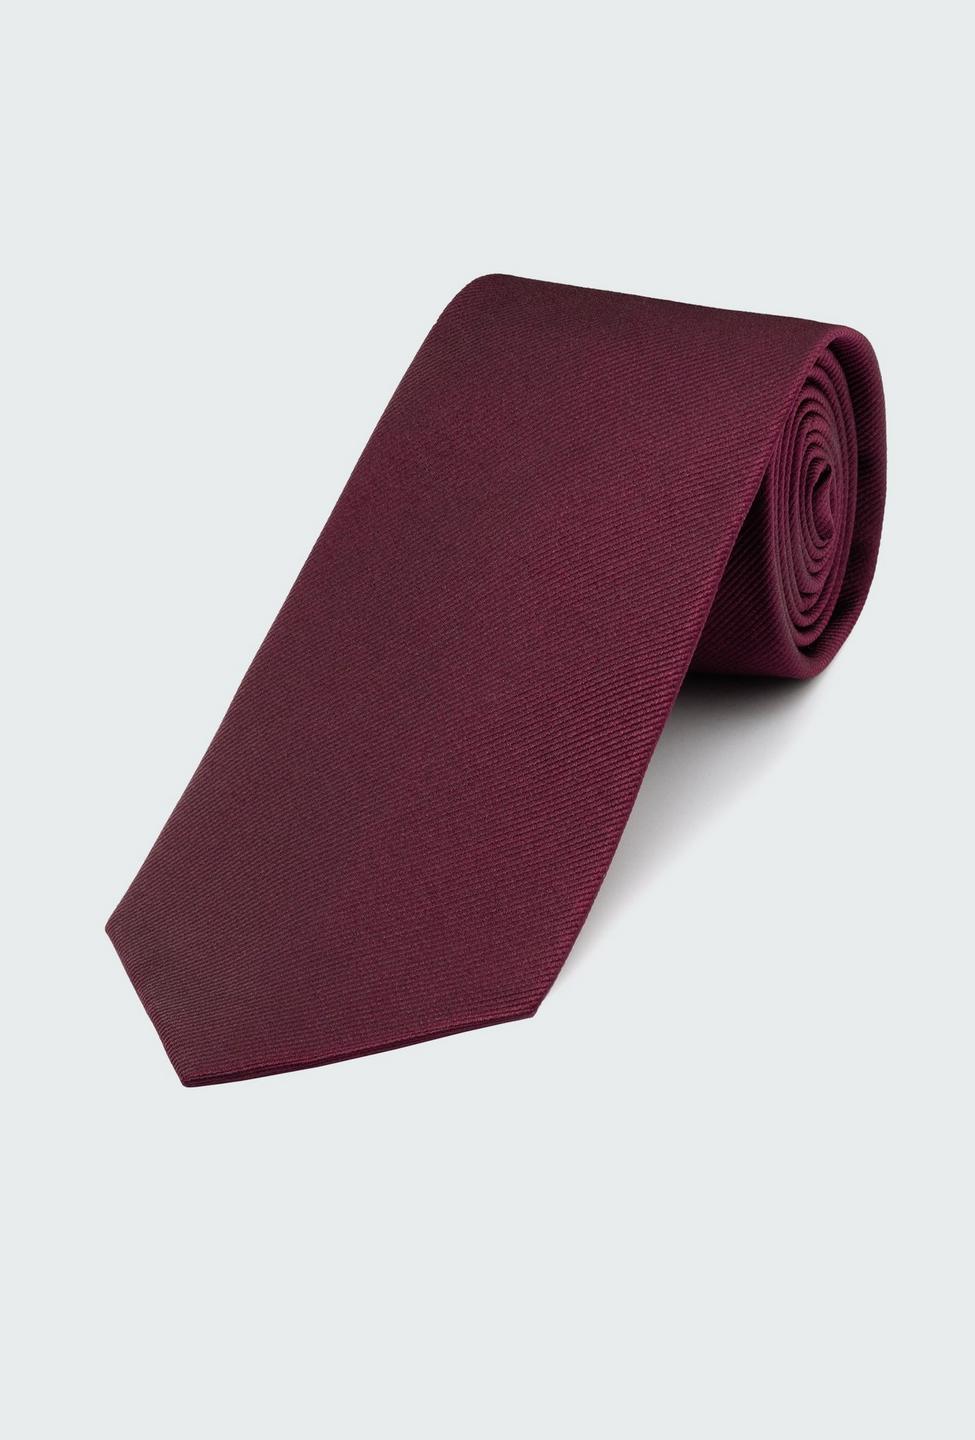 Red tie - Solid Design from Indochino Collection